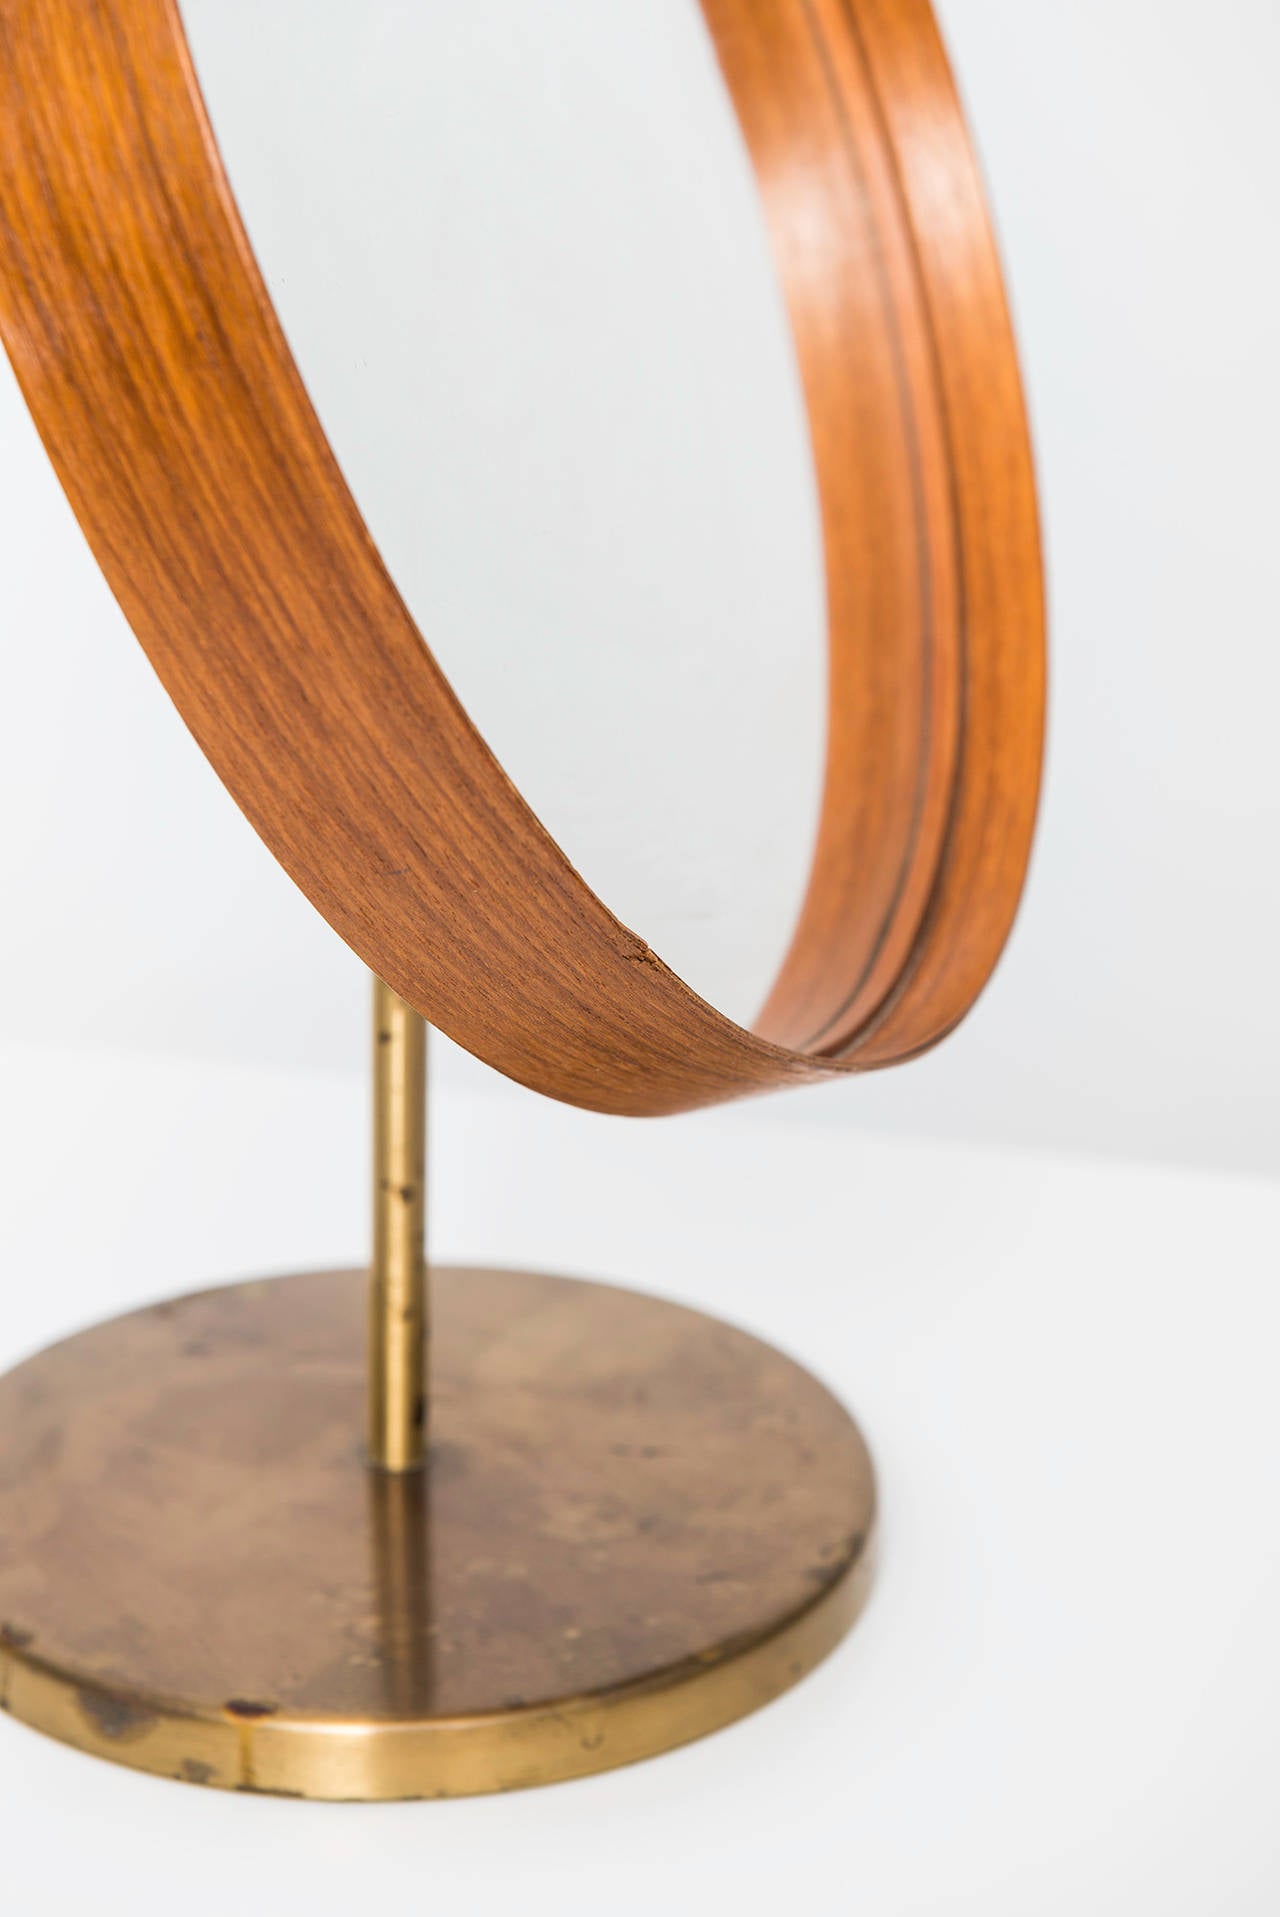 Mid-Century Modern Table Mirror in Teak and Brass by Glasmäster in Markaryd, Sweden